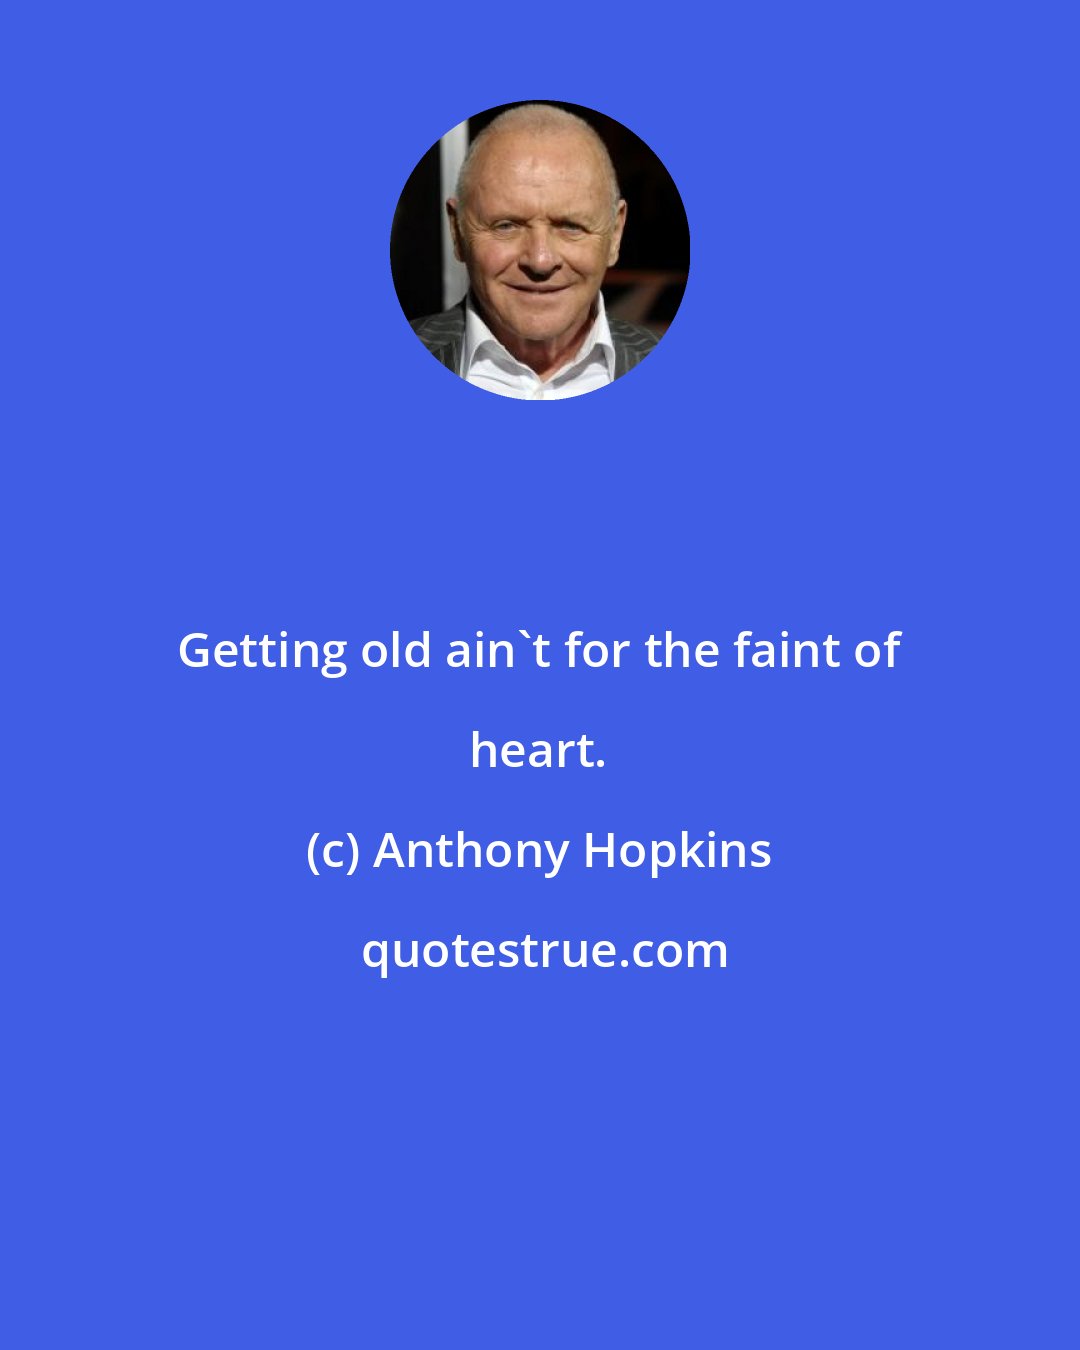 Anthony Hopkins: Getting old ain't for the faint of heart.